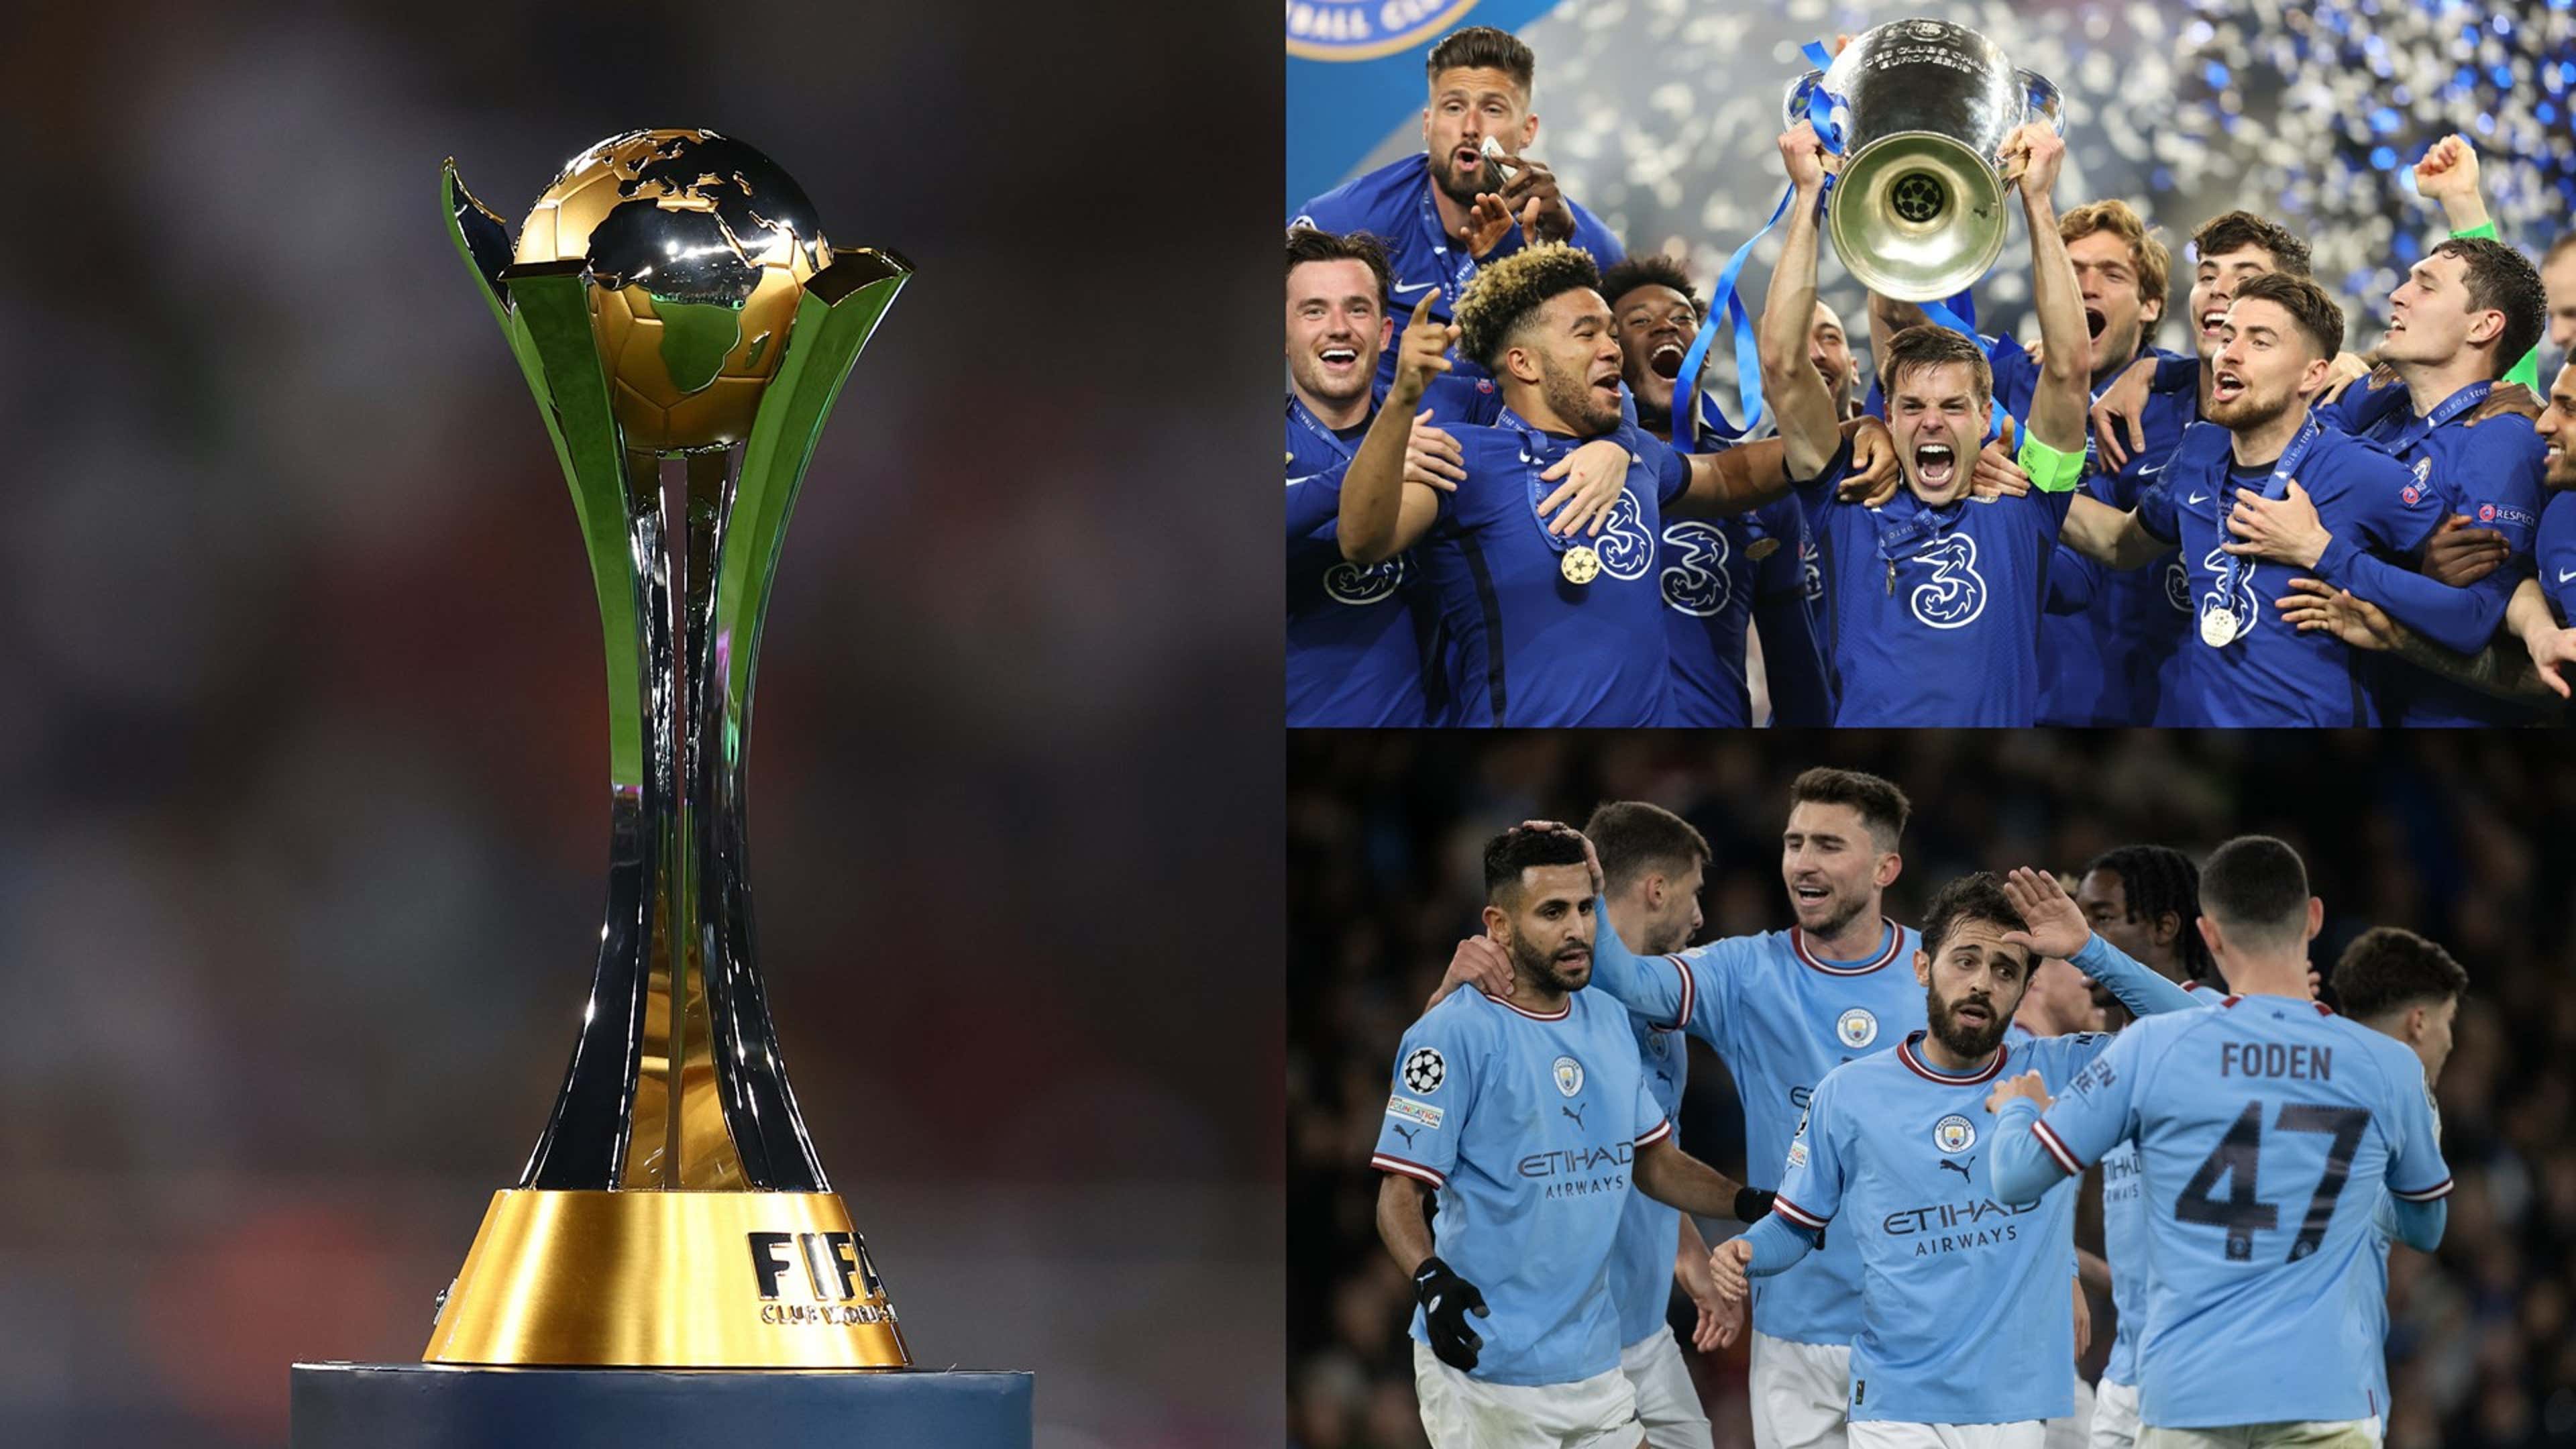 Club World Cup 2025 in USA: Confirmed teams, format, schedule, dates for  FIFA tournament with expanded field